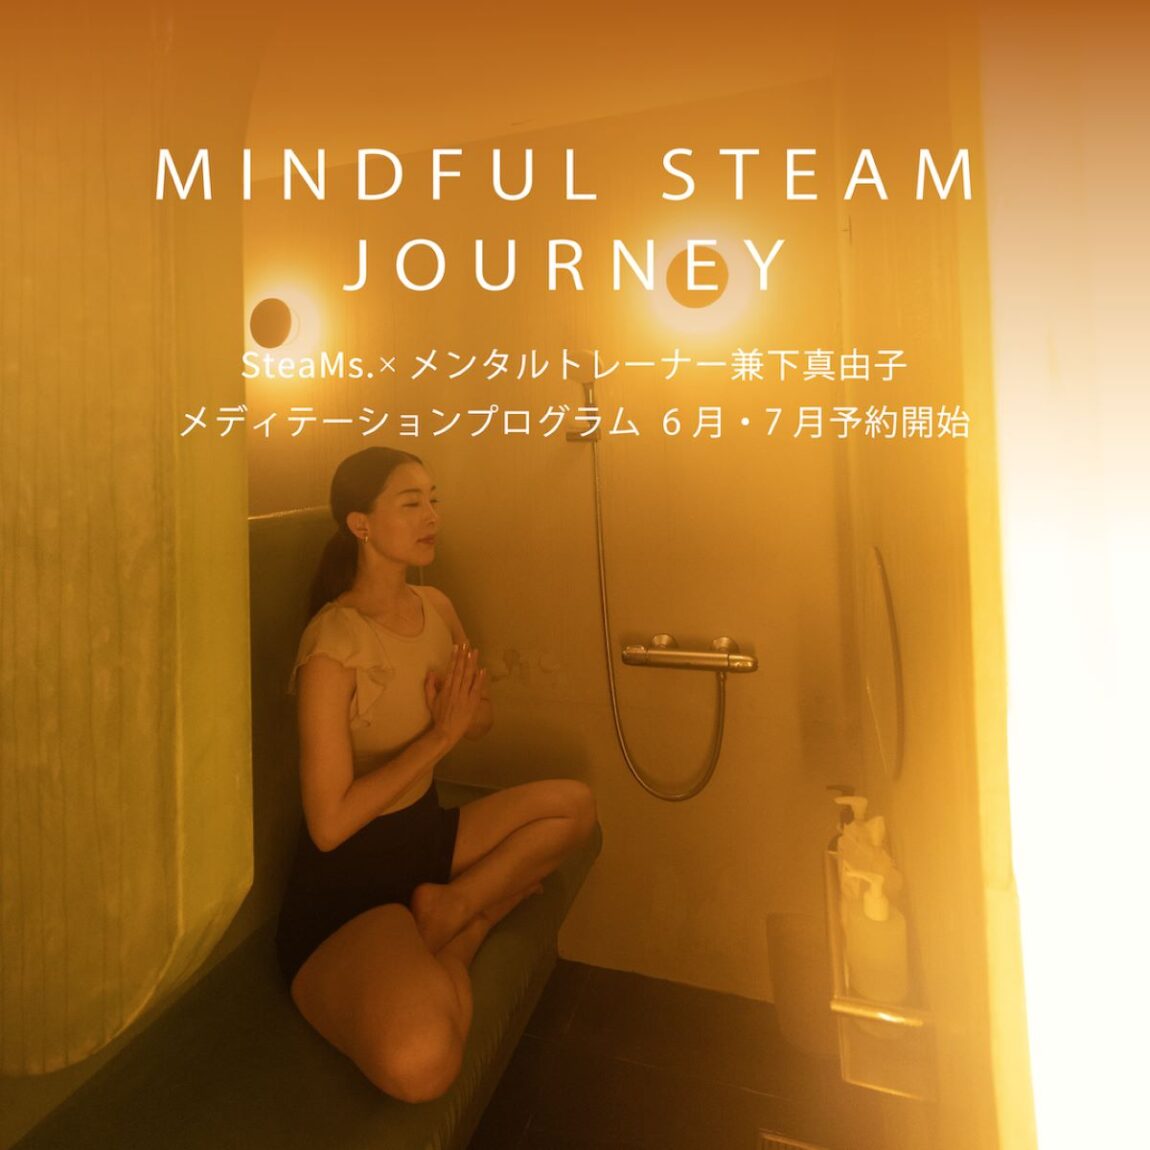 SteaMs.×メディテーション”Mindful Steam Journey”６月と７月の開催日